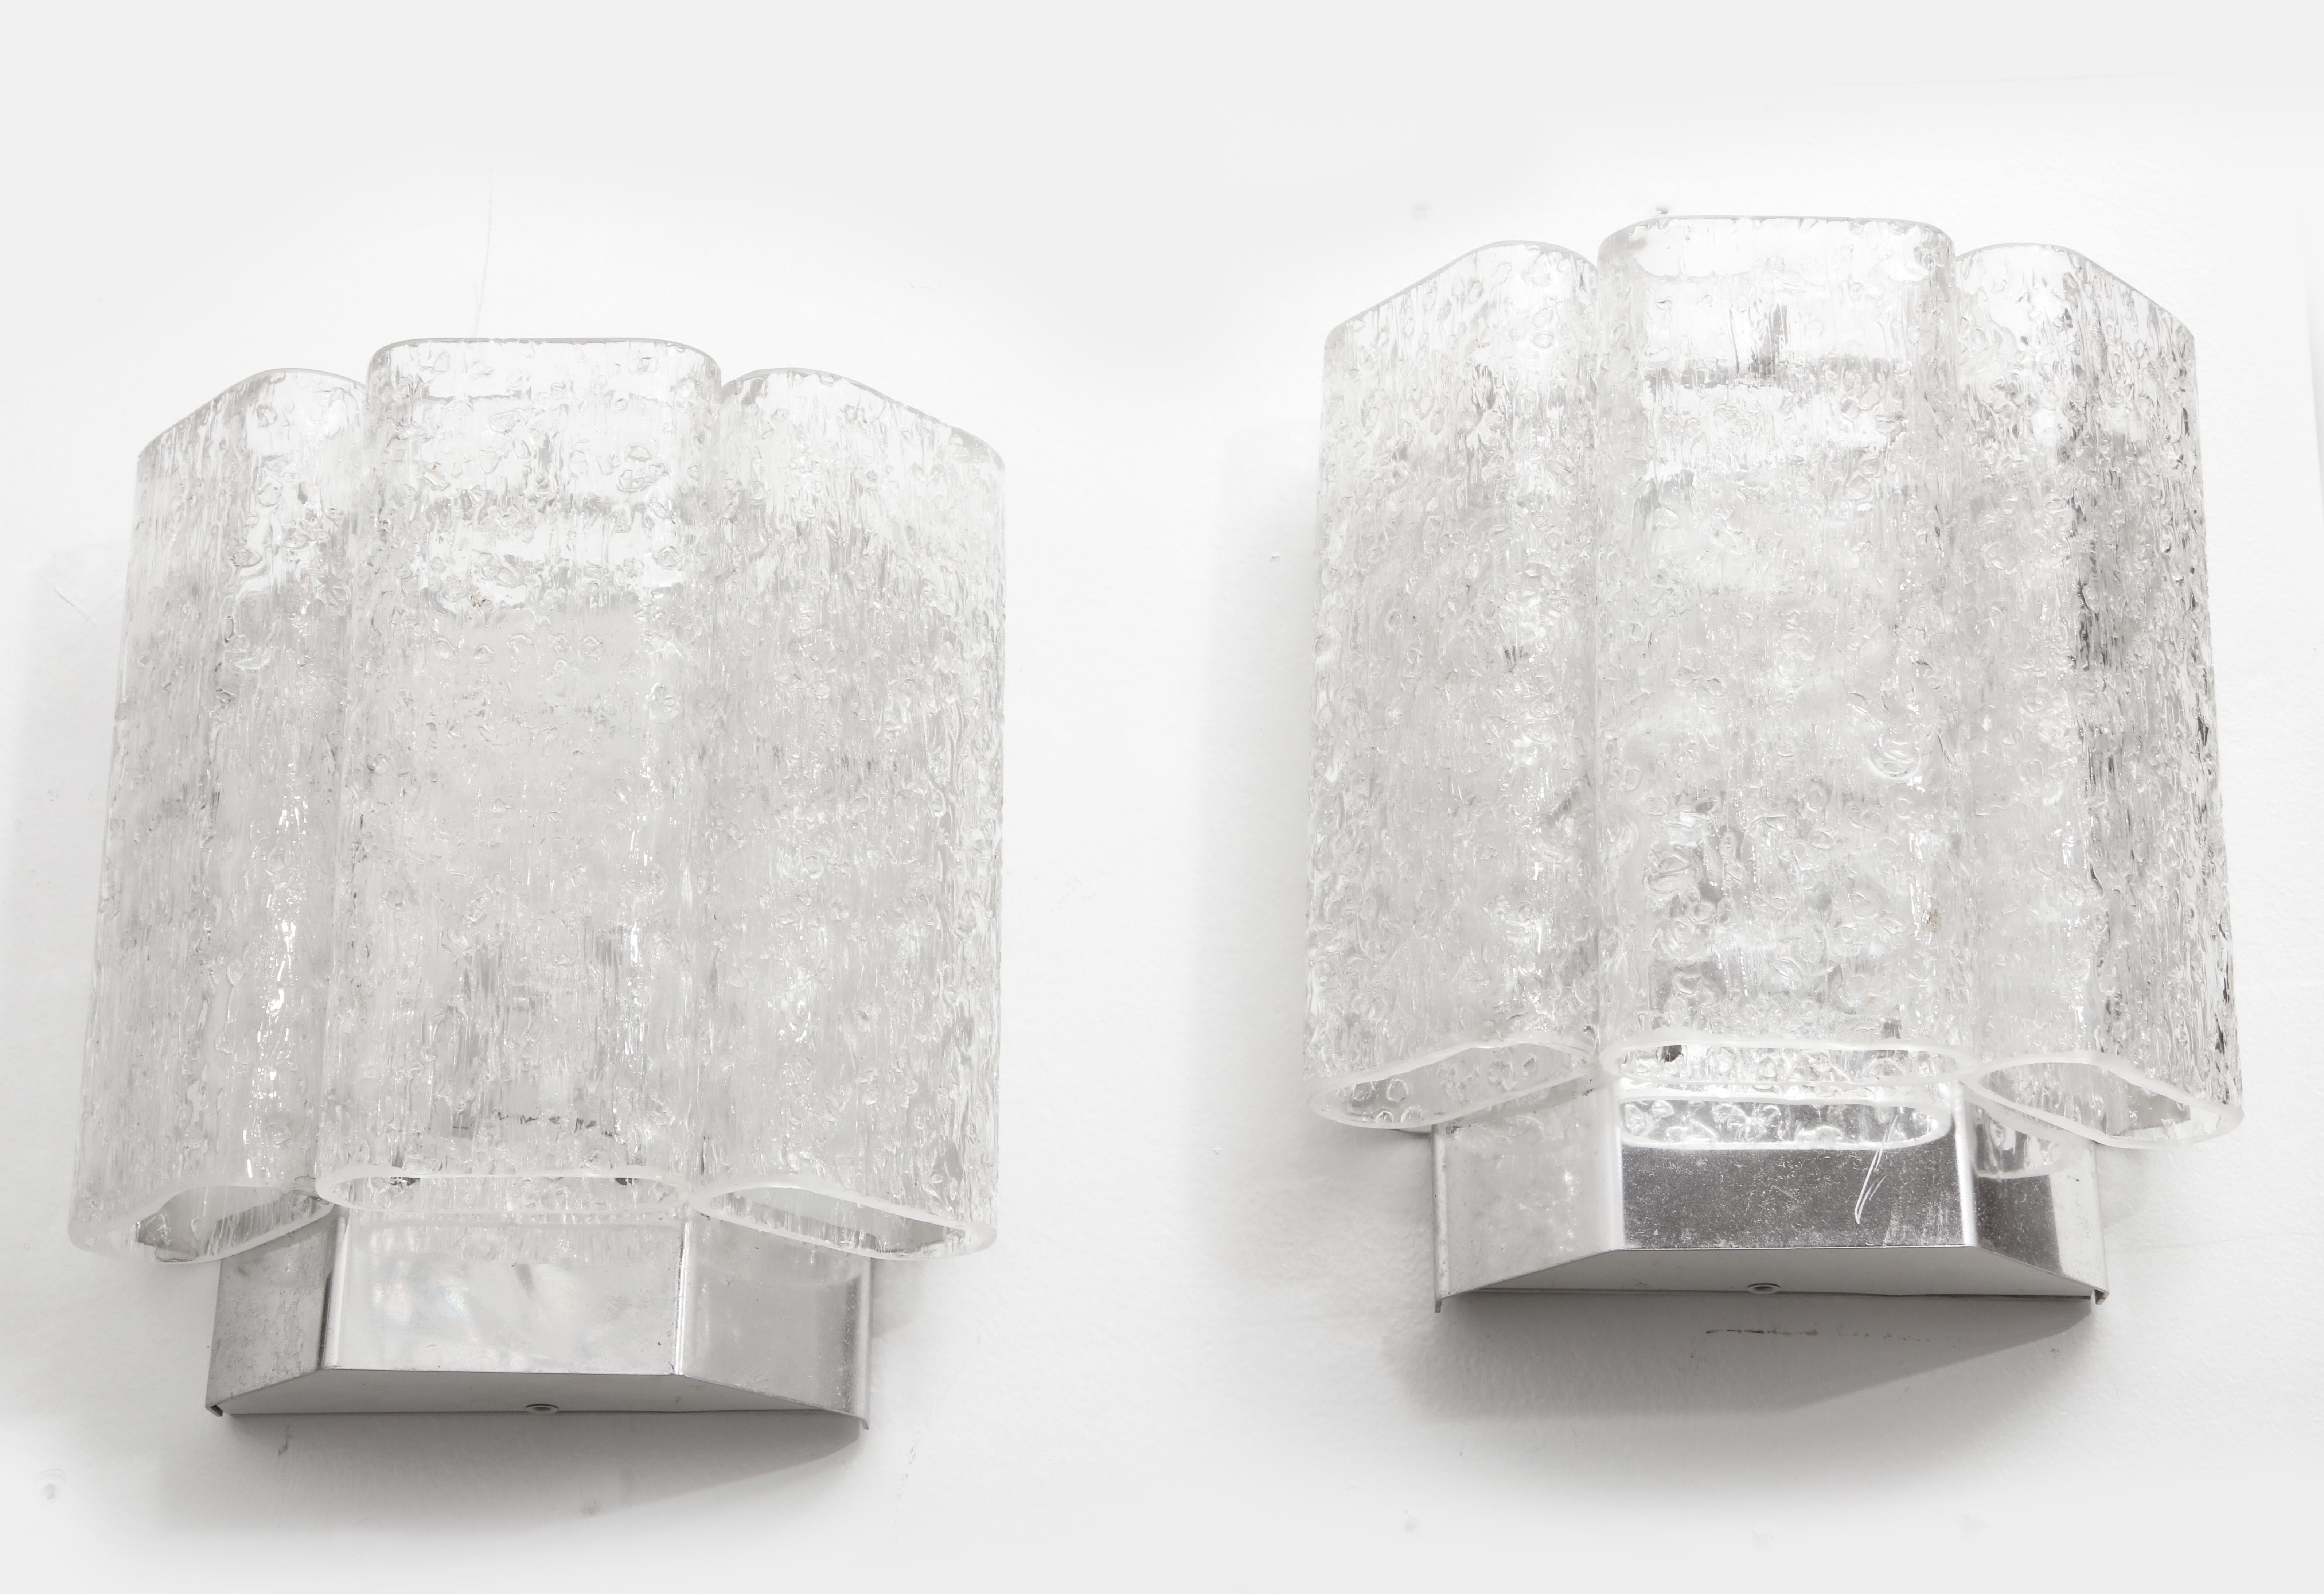 Pair of Murano glass sconces featuring 3 oblong shaped tubes with chromed backplates. Glass has a internal bubbles giving them an ice block effect. Rewired for use in USA.